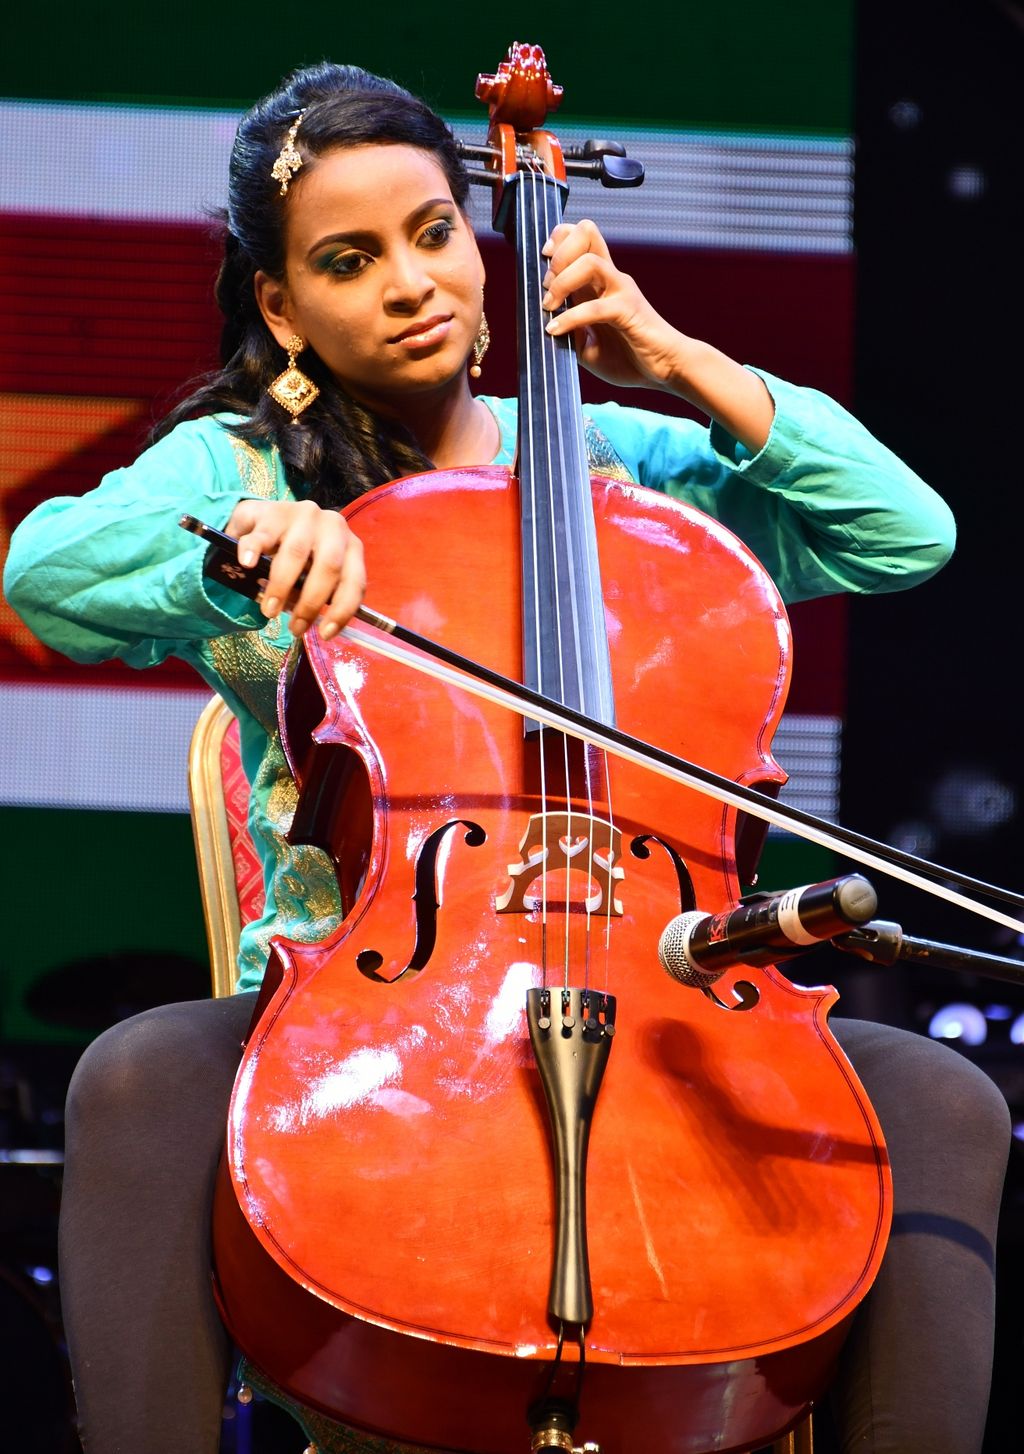 Robin Nandlal of Suriname plays the cello during the talent section of the pageant.